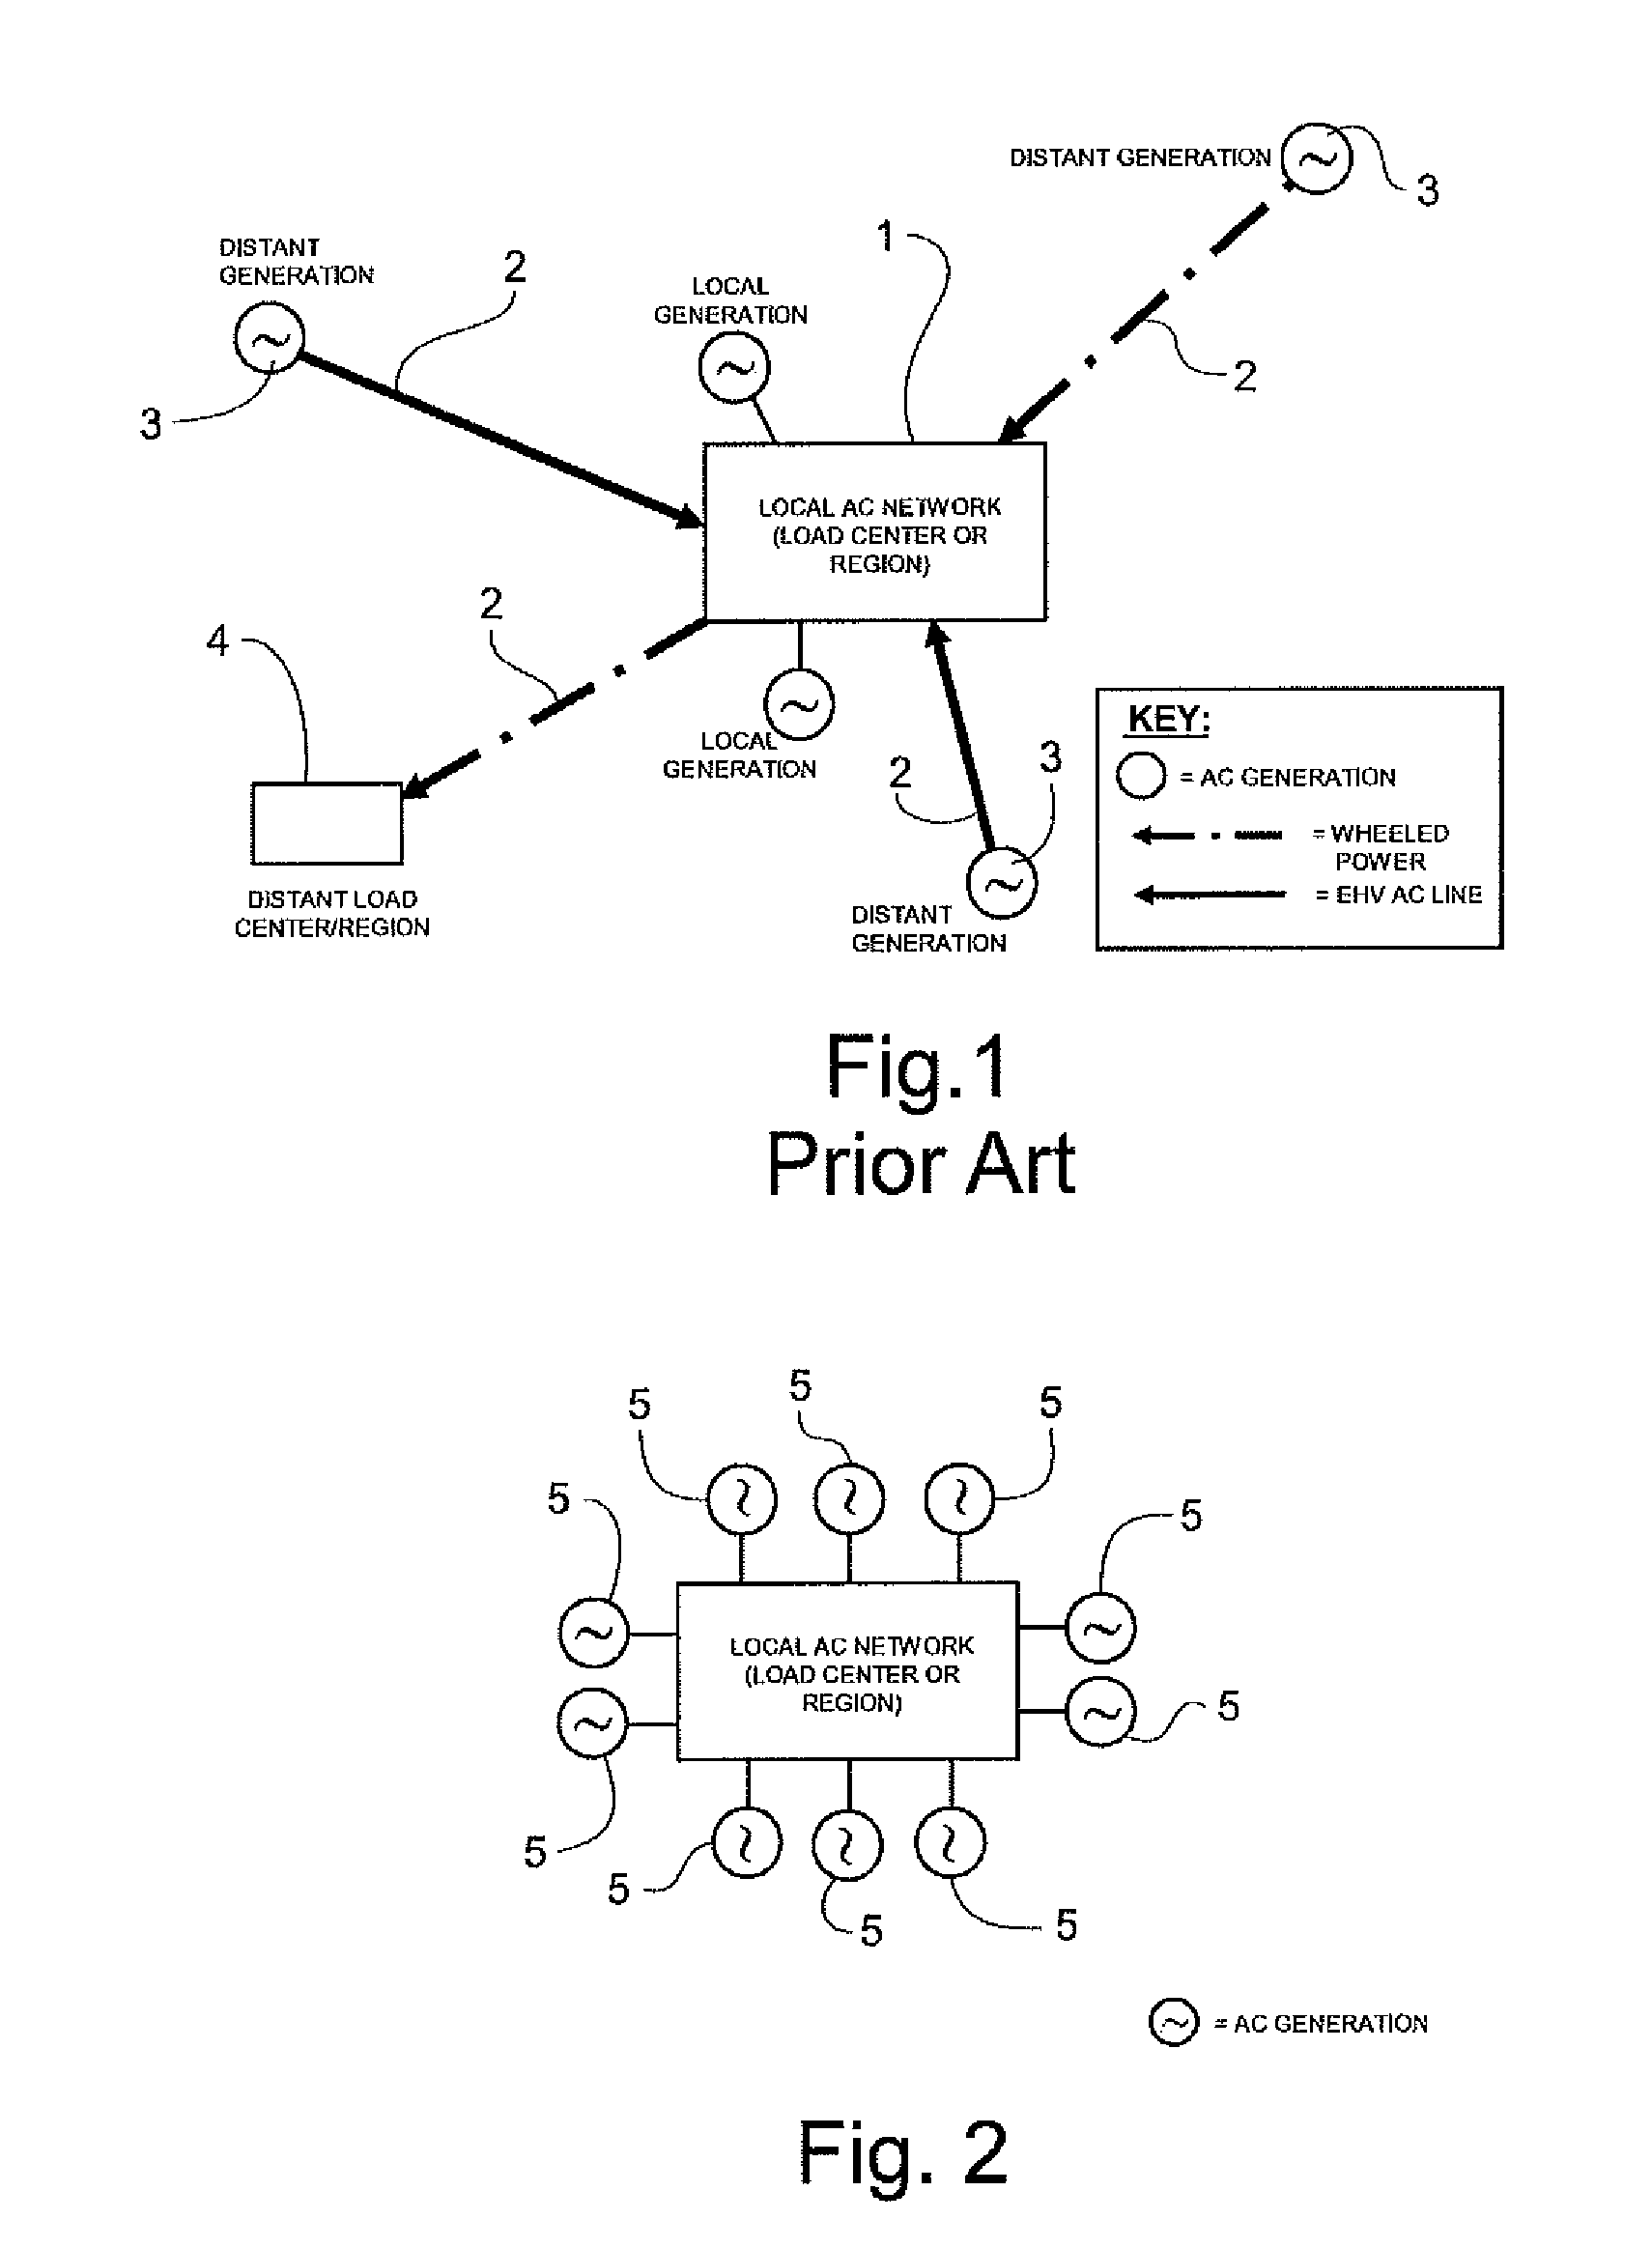 Method and apparatus for improving AC transmission system dispatchability, system stability, and power flow controllability using DC transmission systems